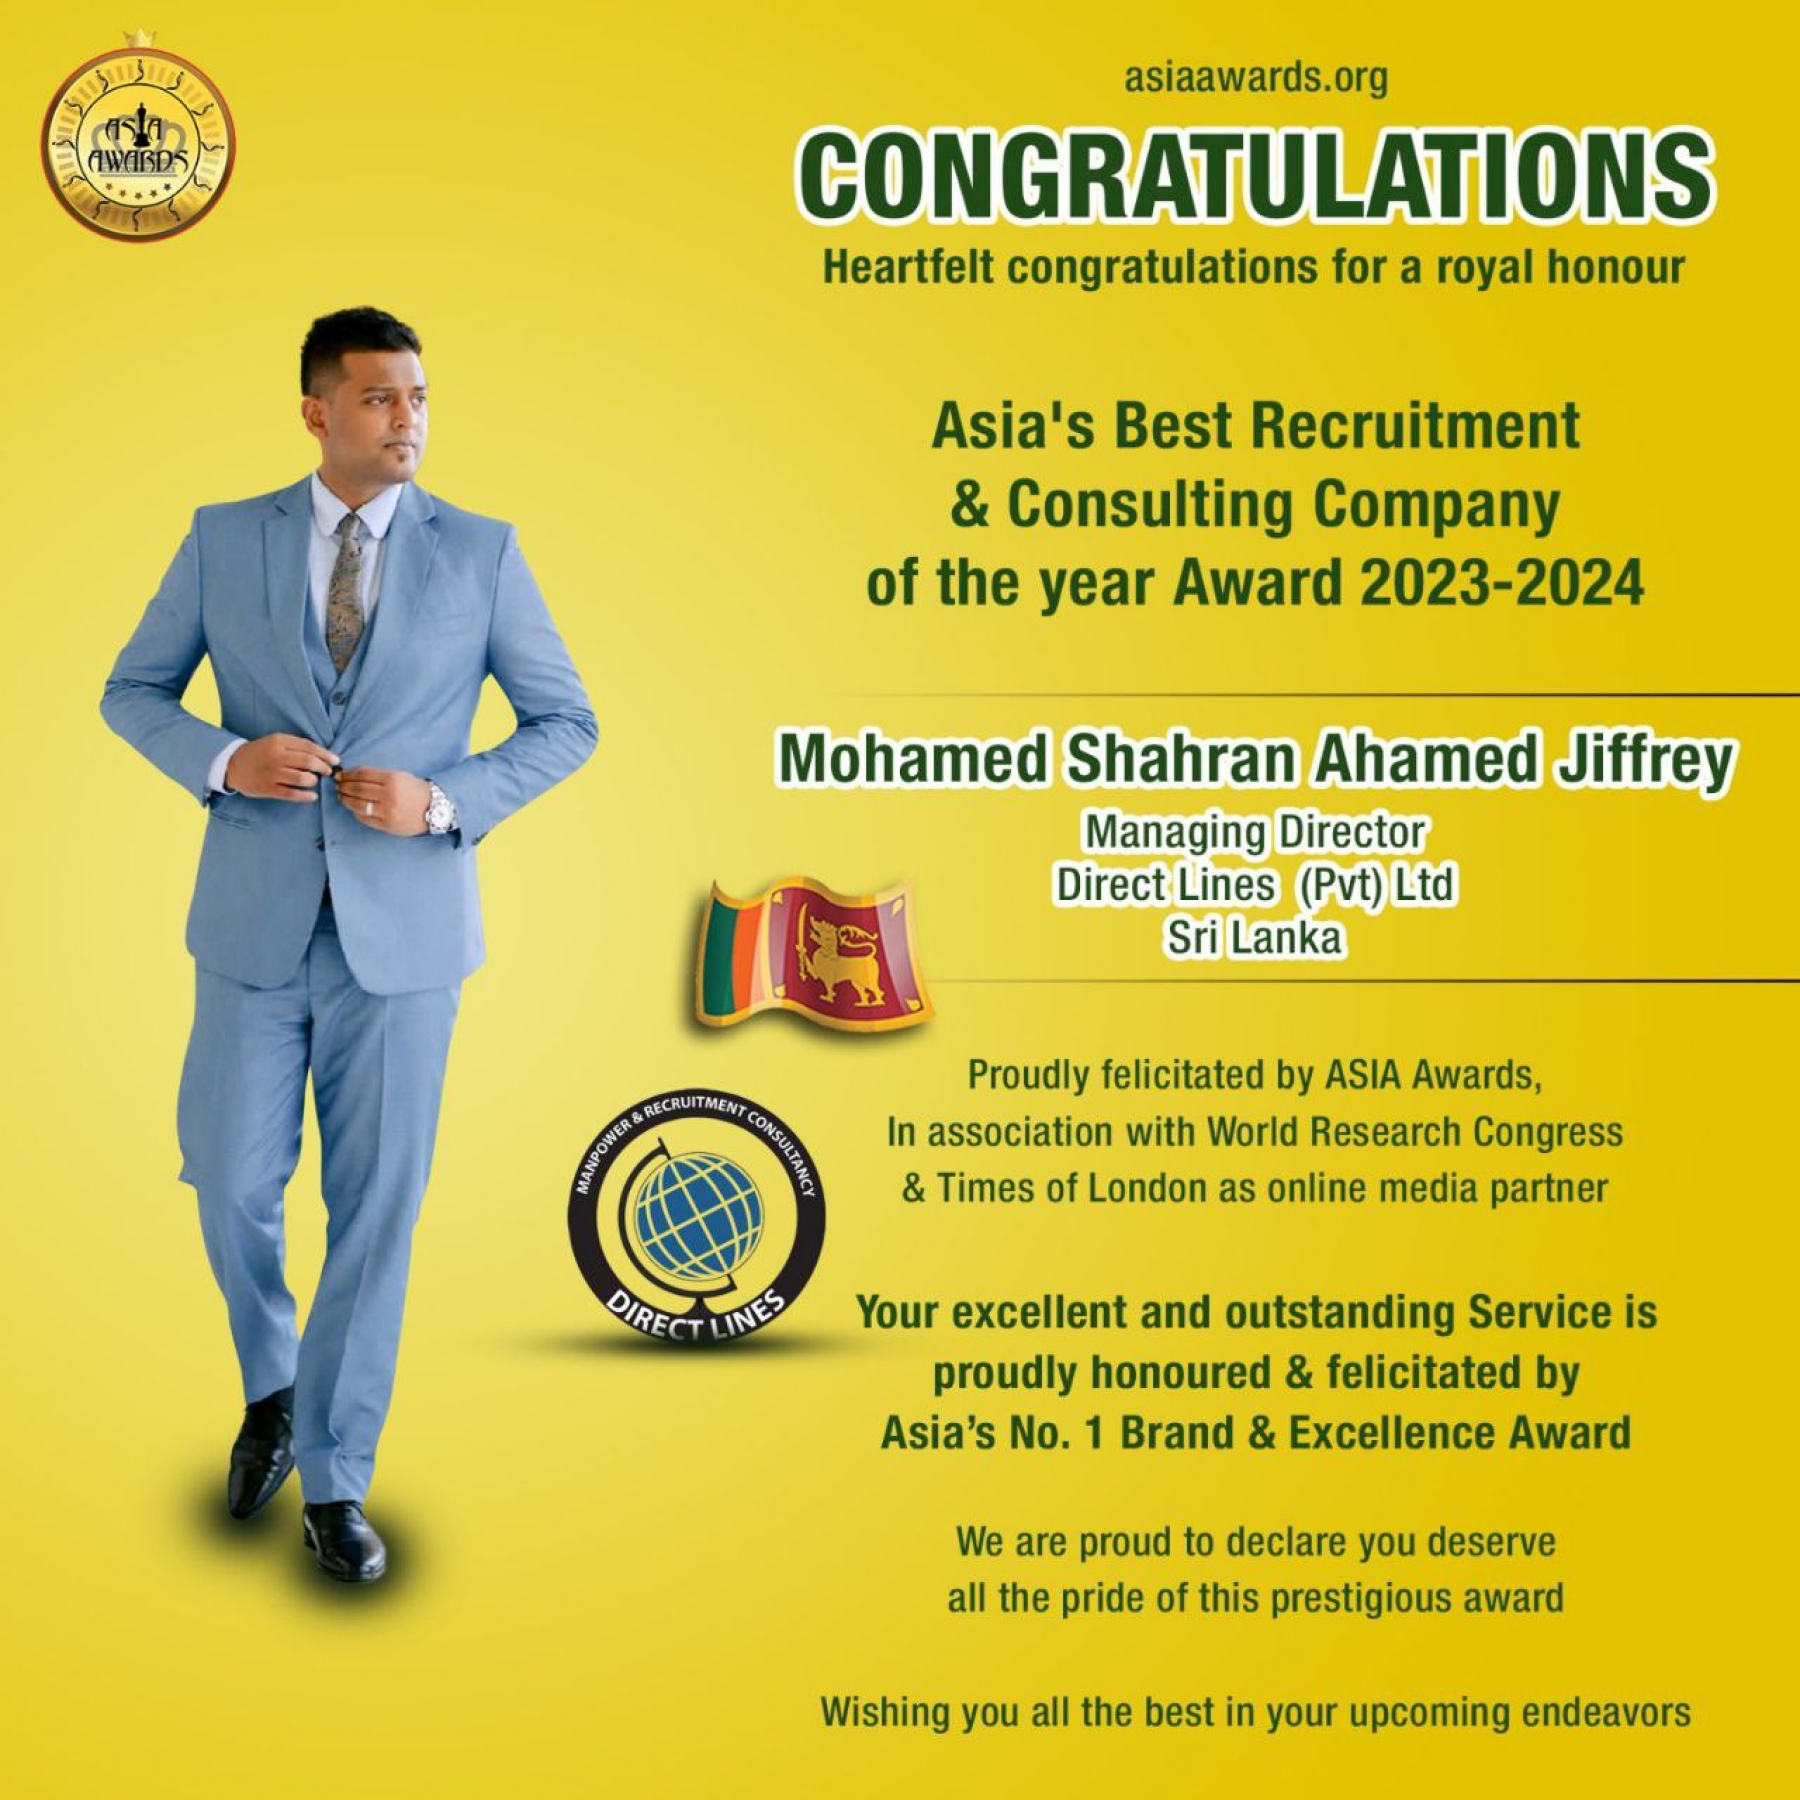 Mohamed Shahran Ahamed Jiffrey Has bagged Asia's Best Recruitment and Consulting Company of the Year Award